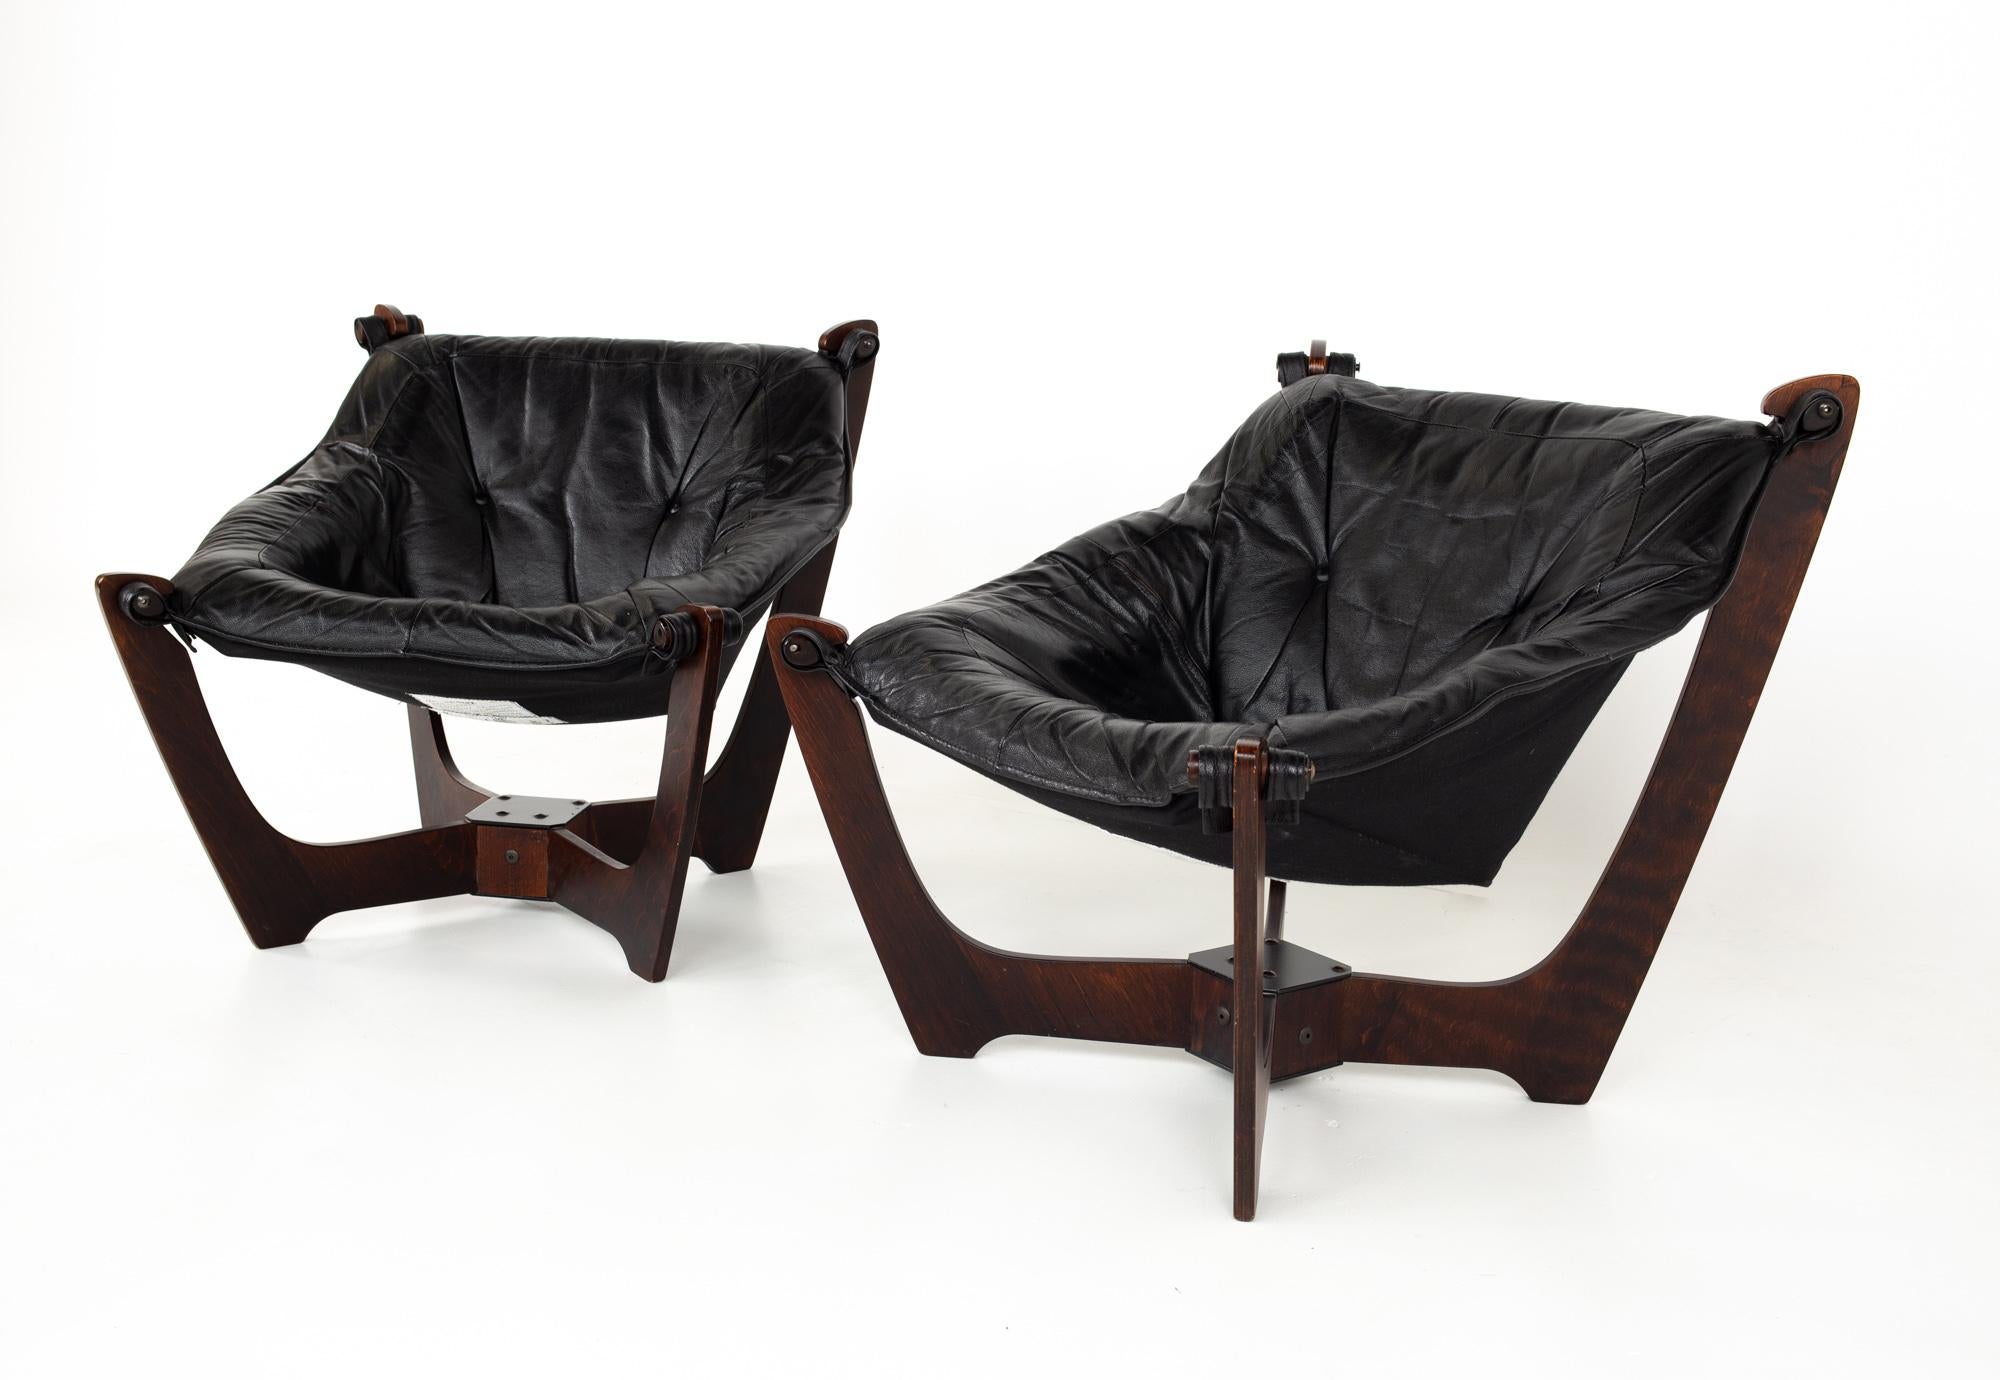 Odd Knutsen mid century Luna leather lounge chairs - pair
Each chair measures: 29 wide x 33 deep x 29 high, with a seat height of 17 inches

All pieces of furniture can be had in what we call restored vintage condition. That means the piece is